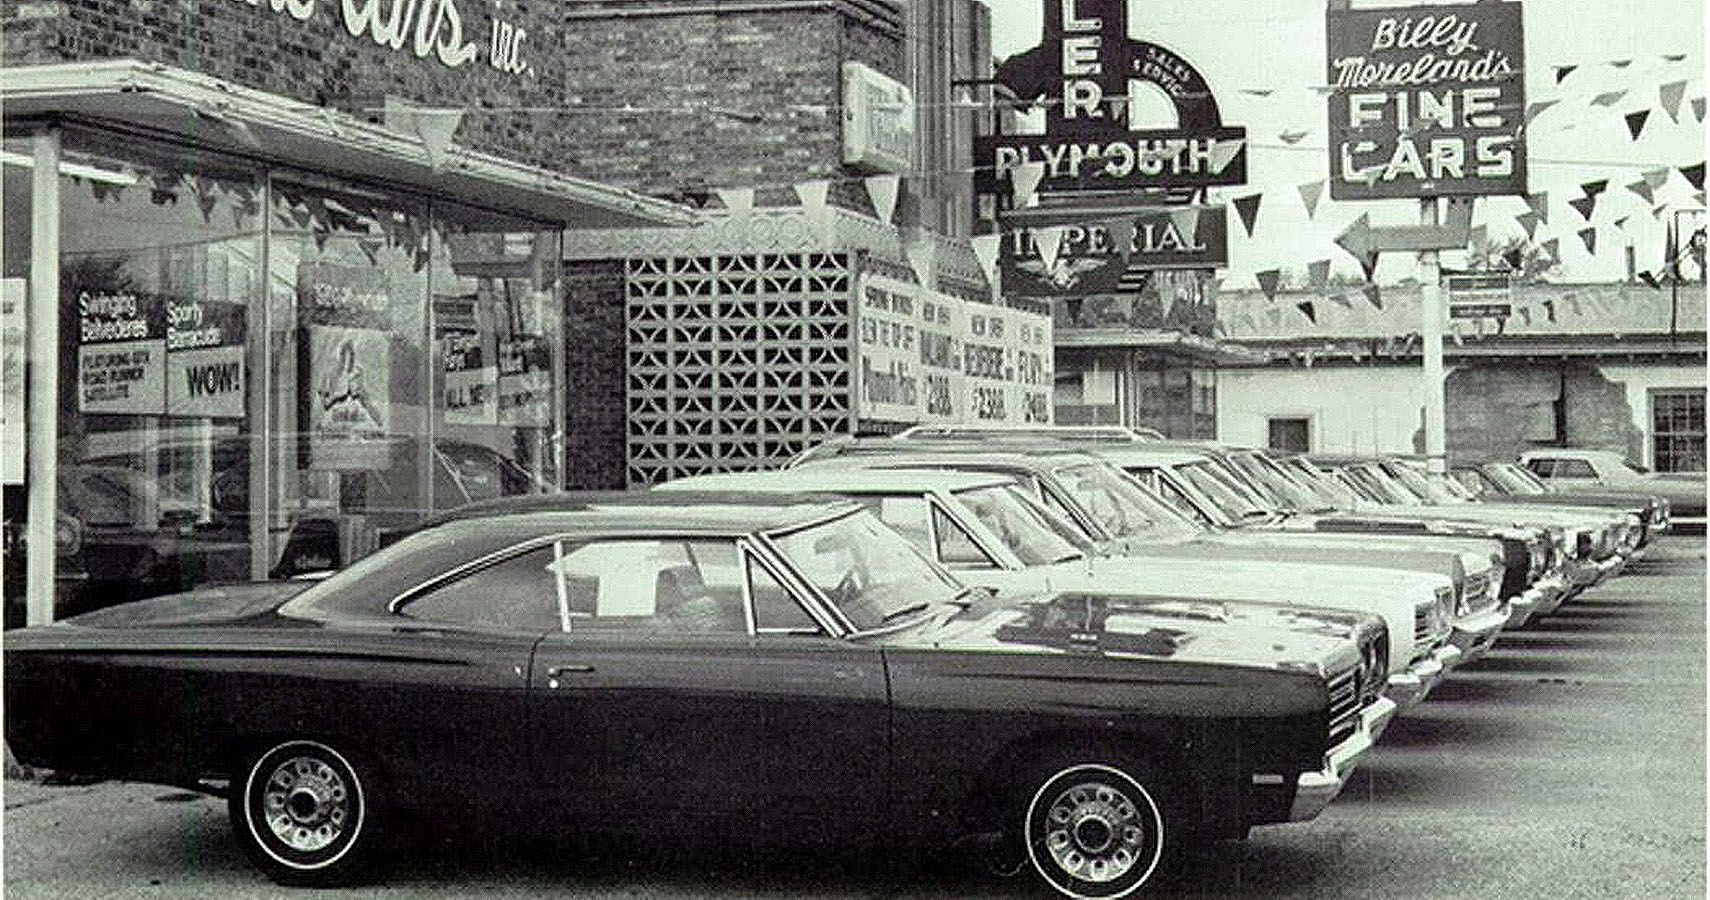 A long line of 1968 Plymouth Roadrunners among other cars